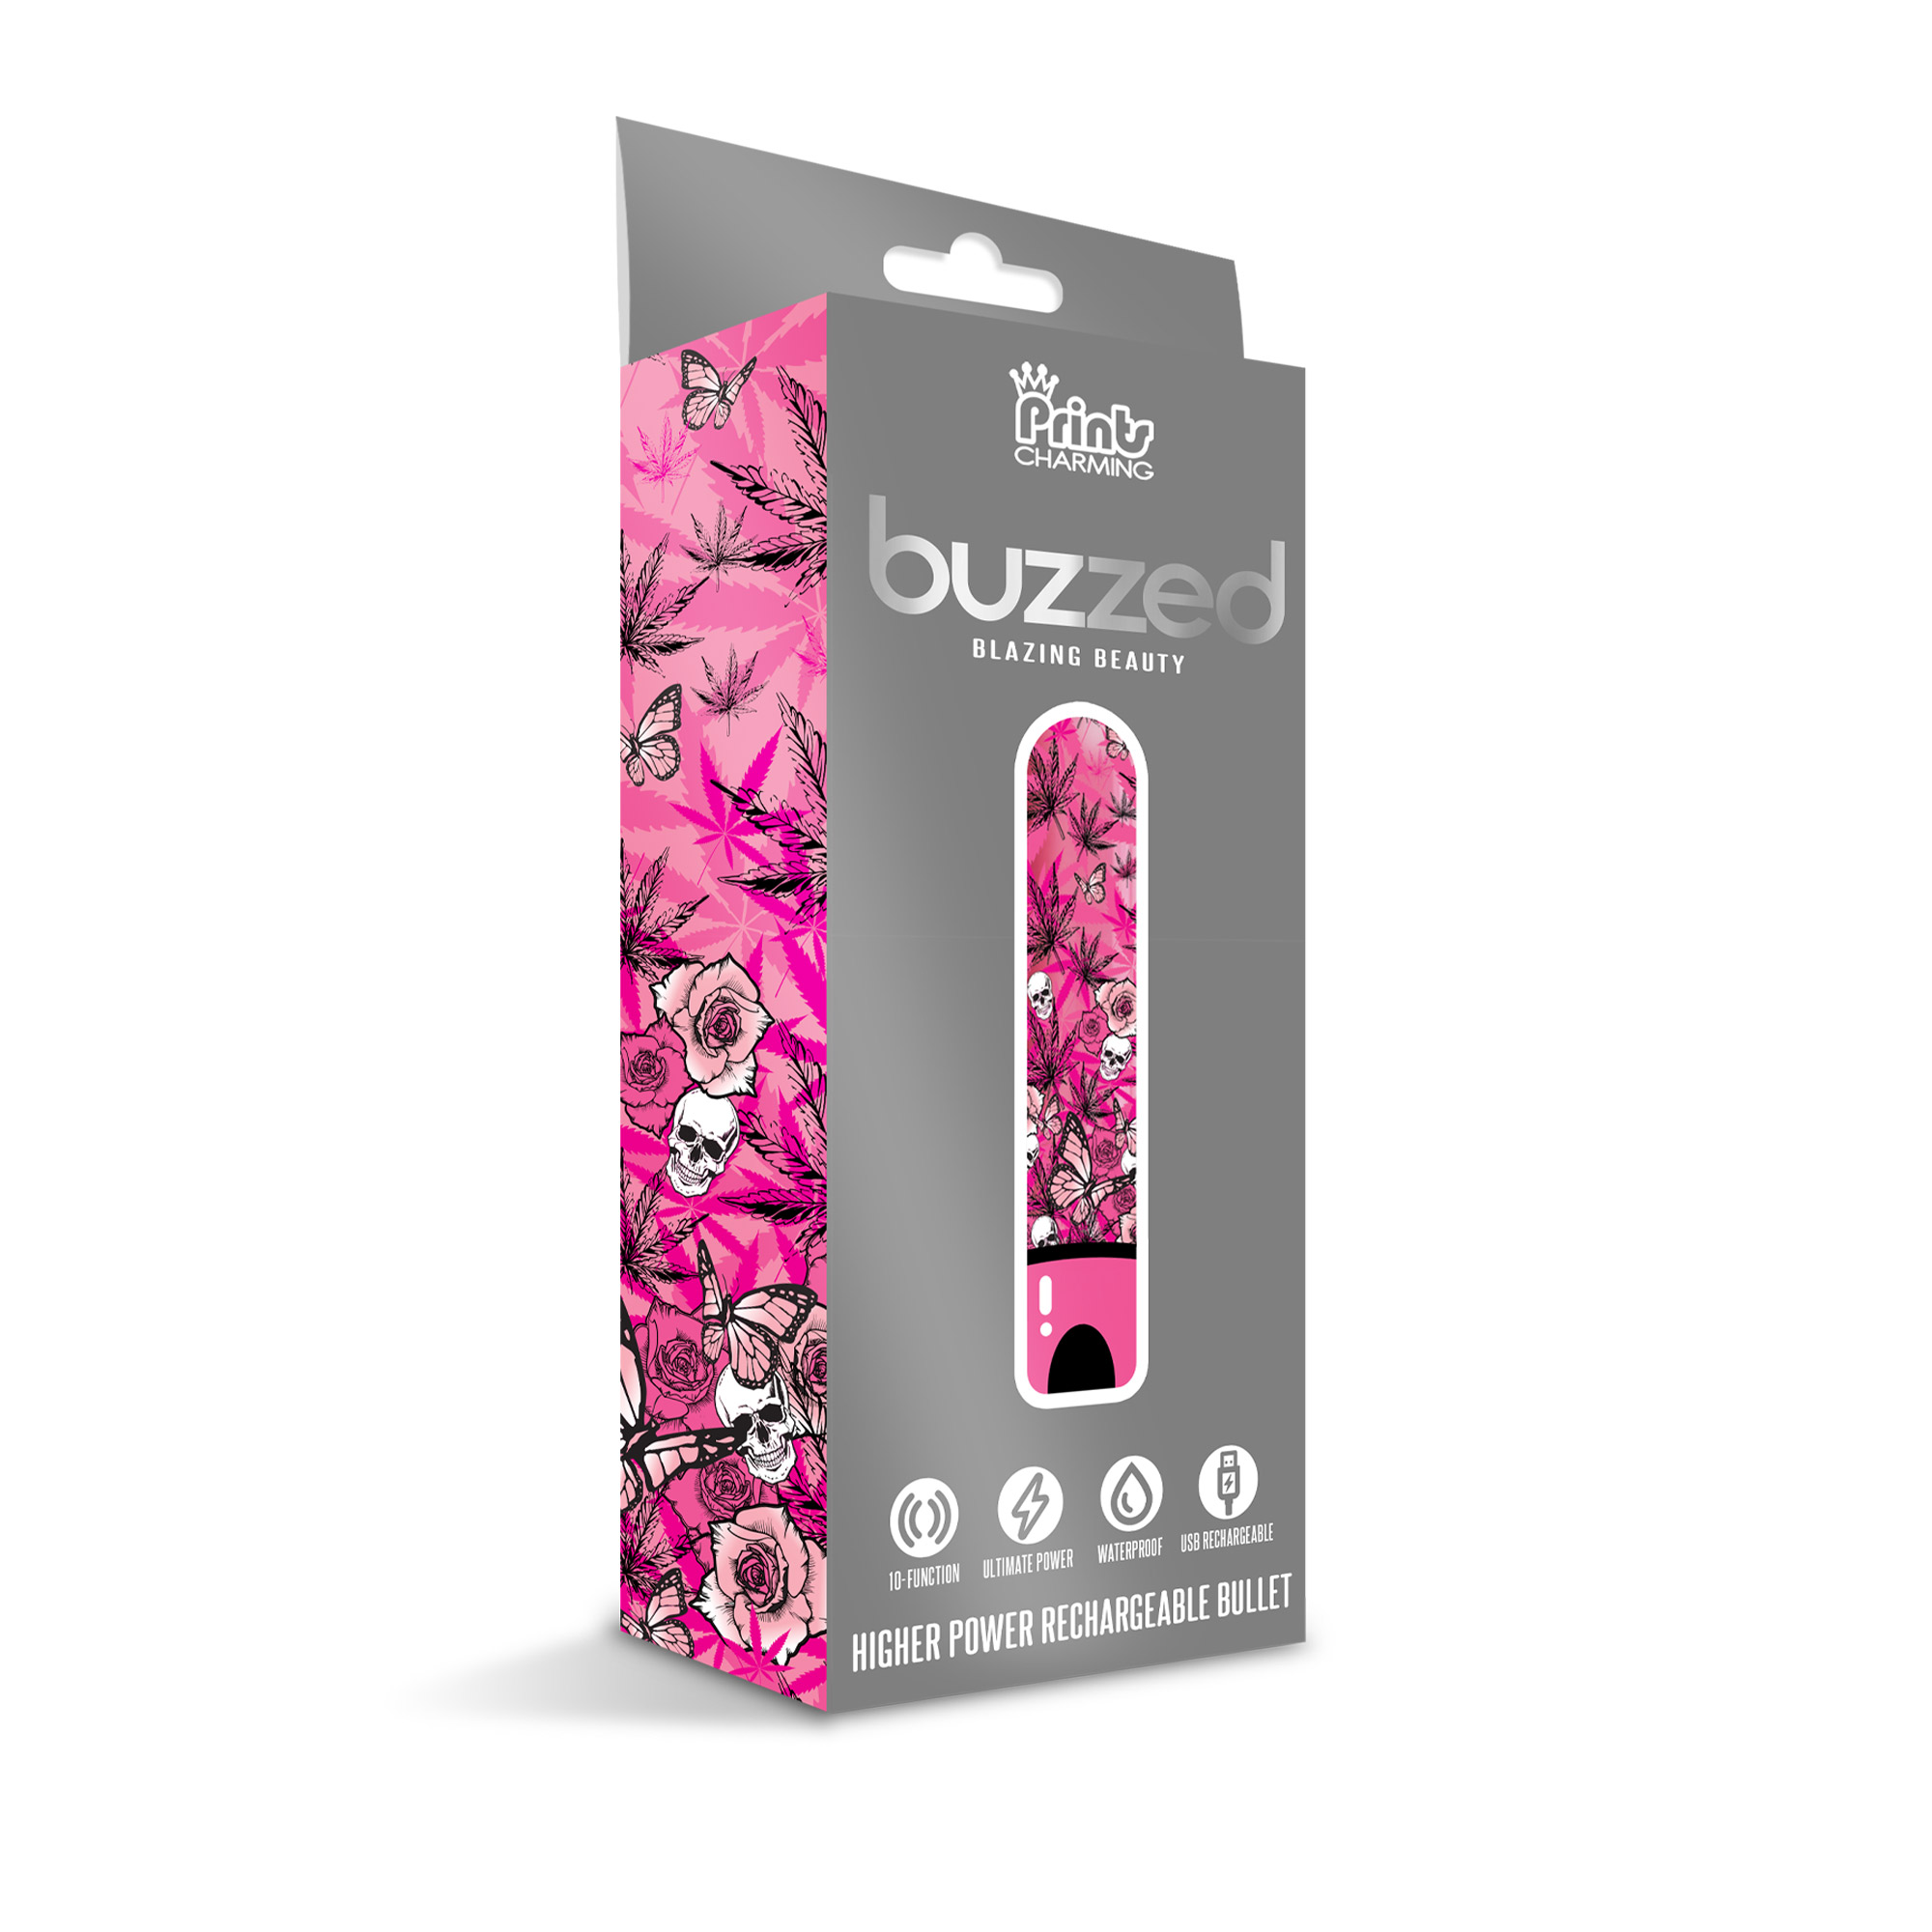 PRINTS CHARMING BUZZED HIGHER POWER RECHARGEABLE BULLET BLAZING BEAUTY - Click Image to Close